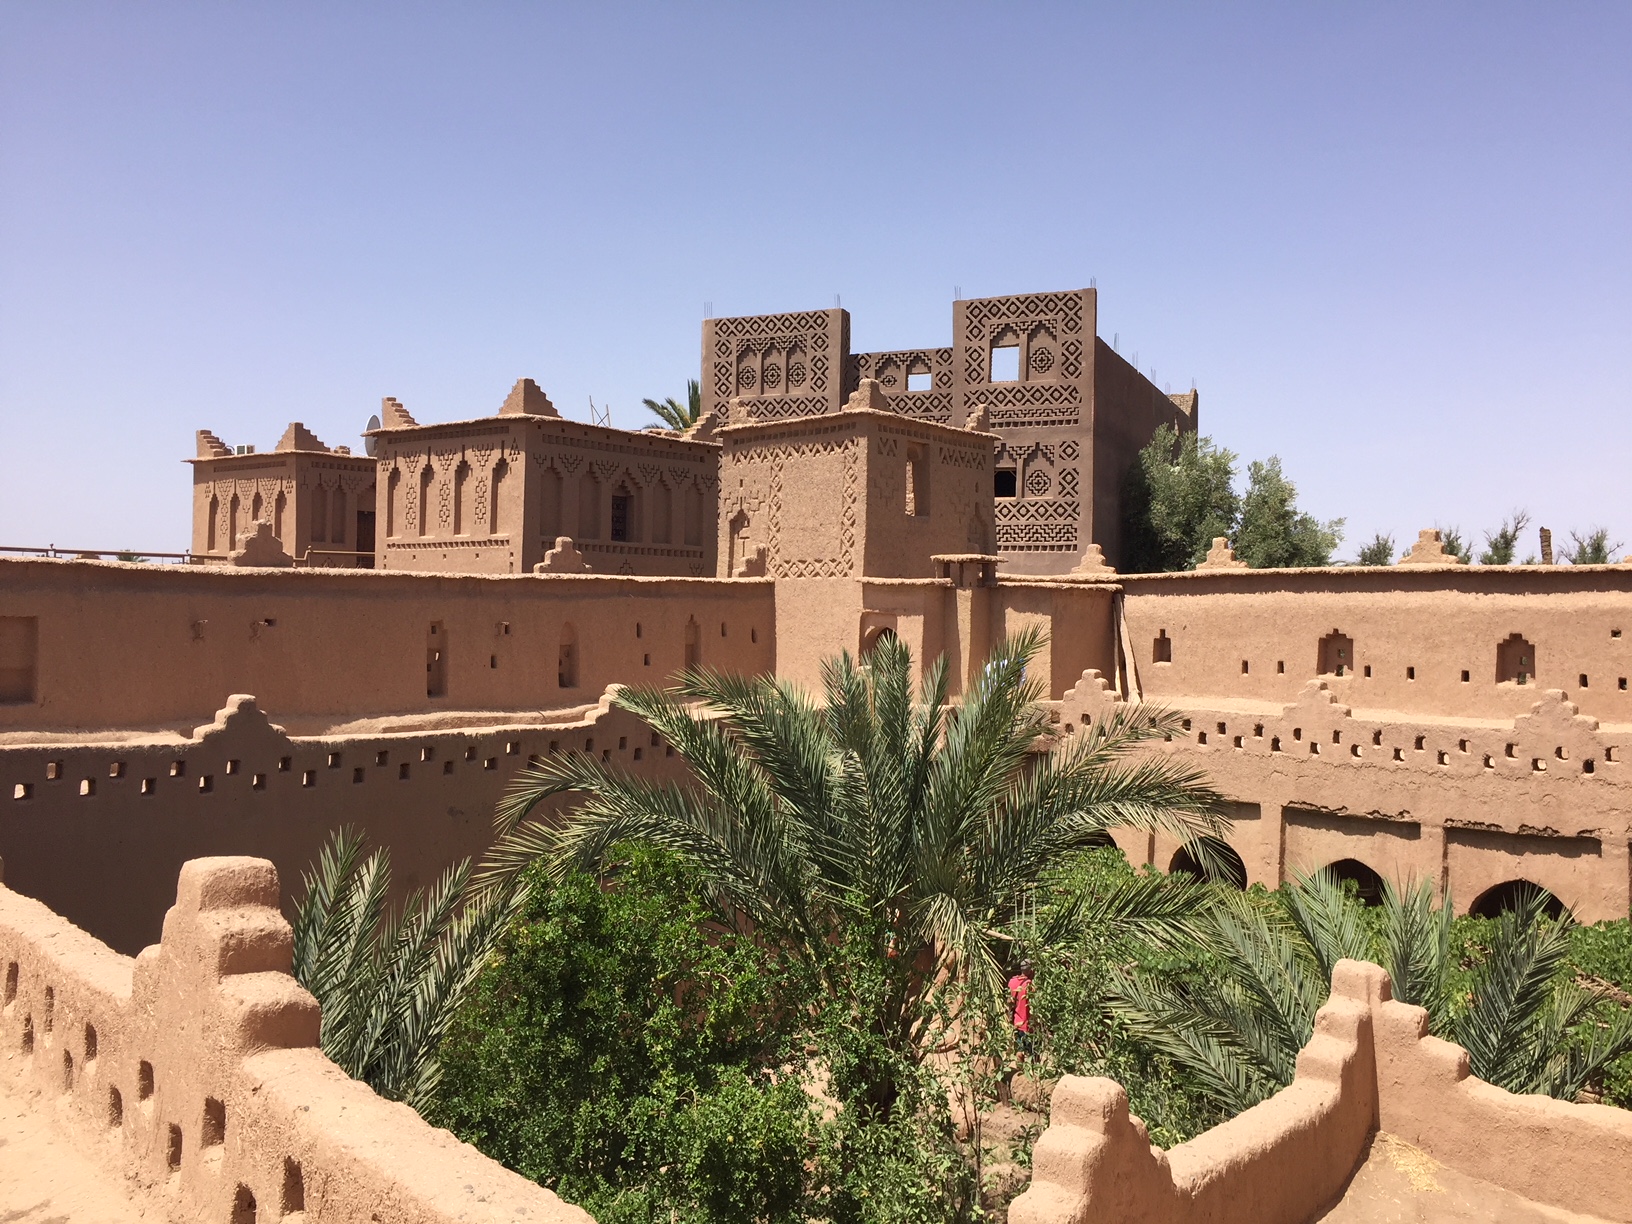 6-night Morocco guided tour with fights from $1,099